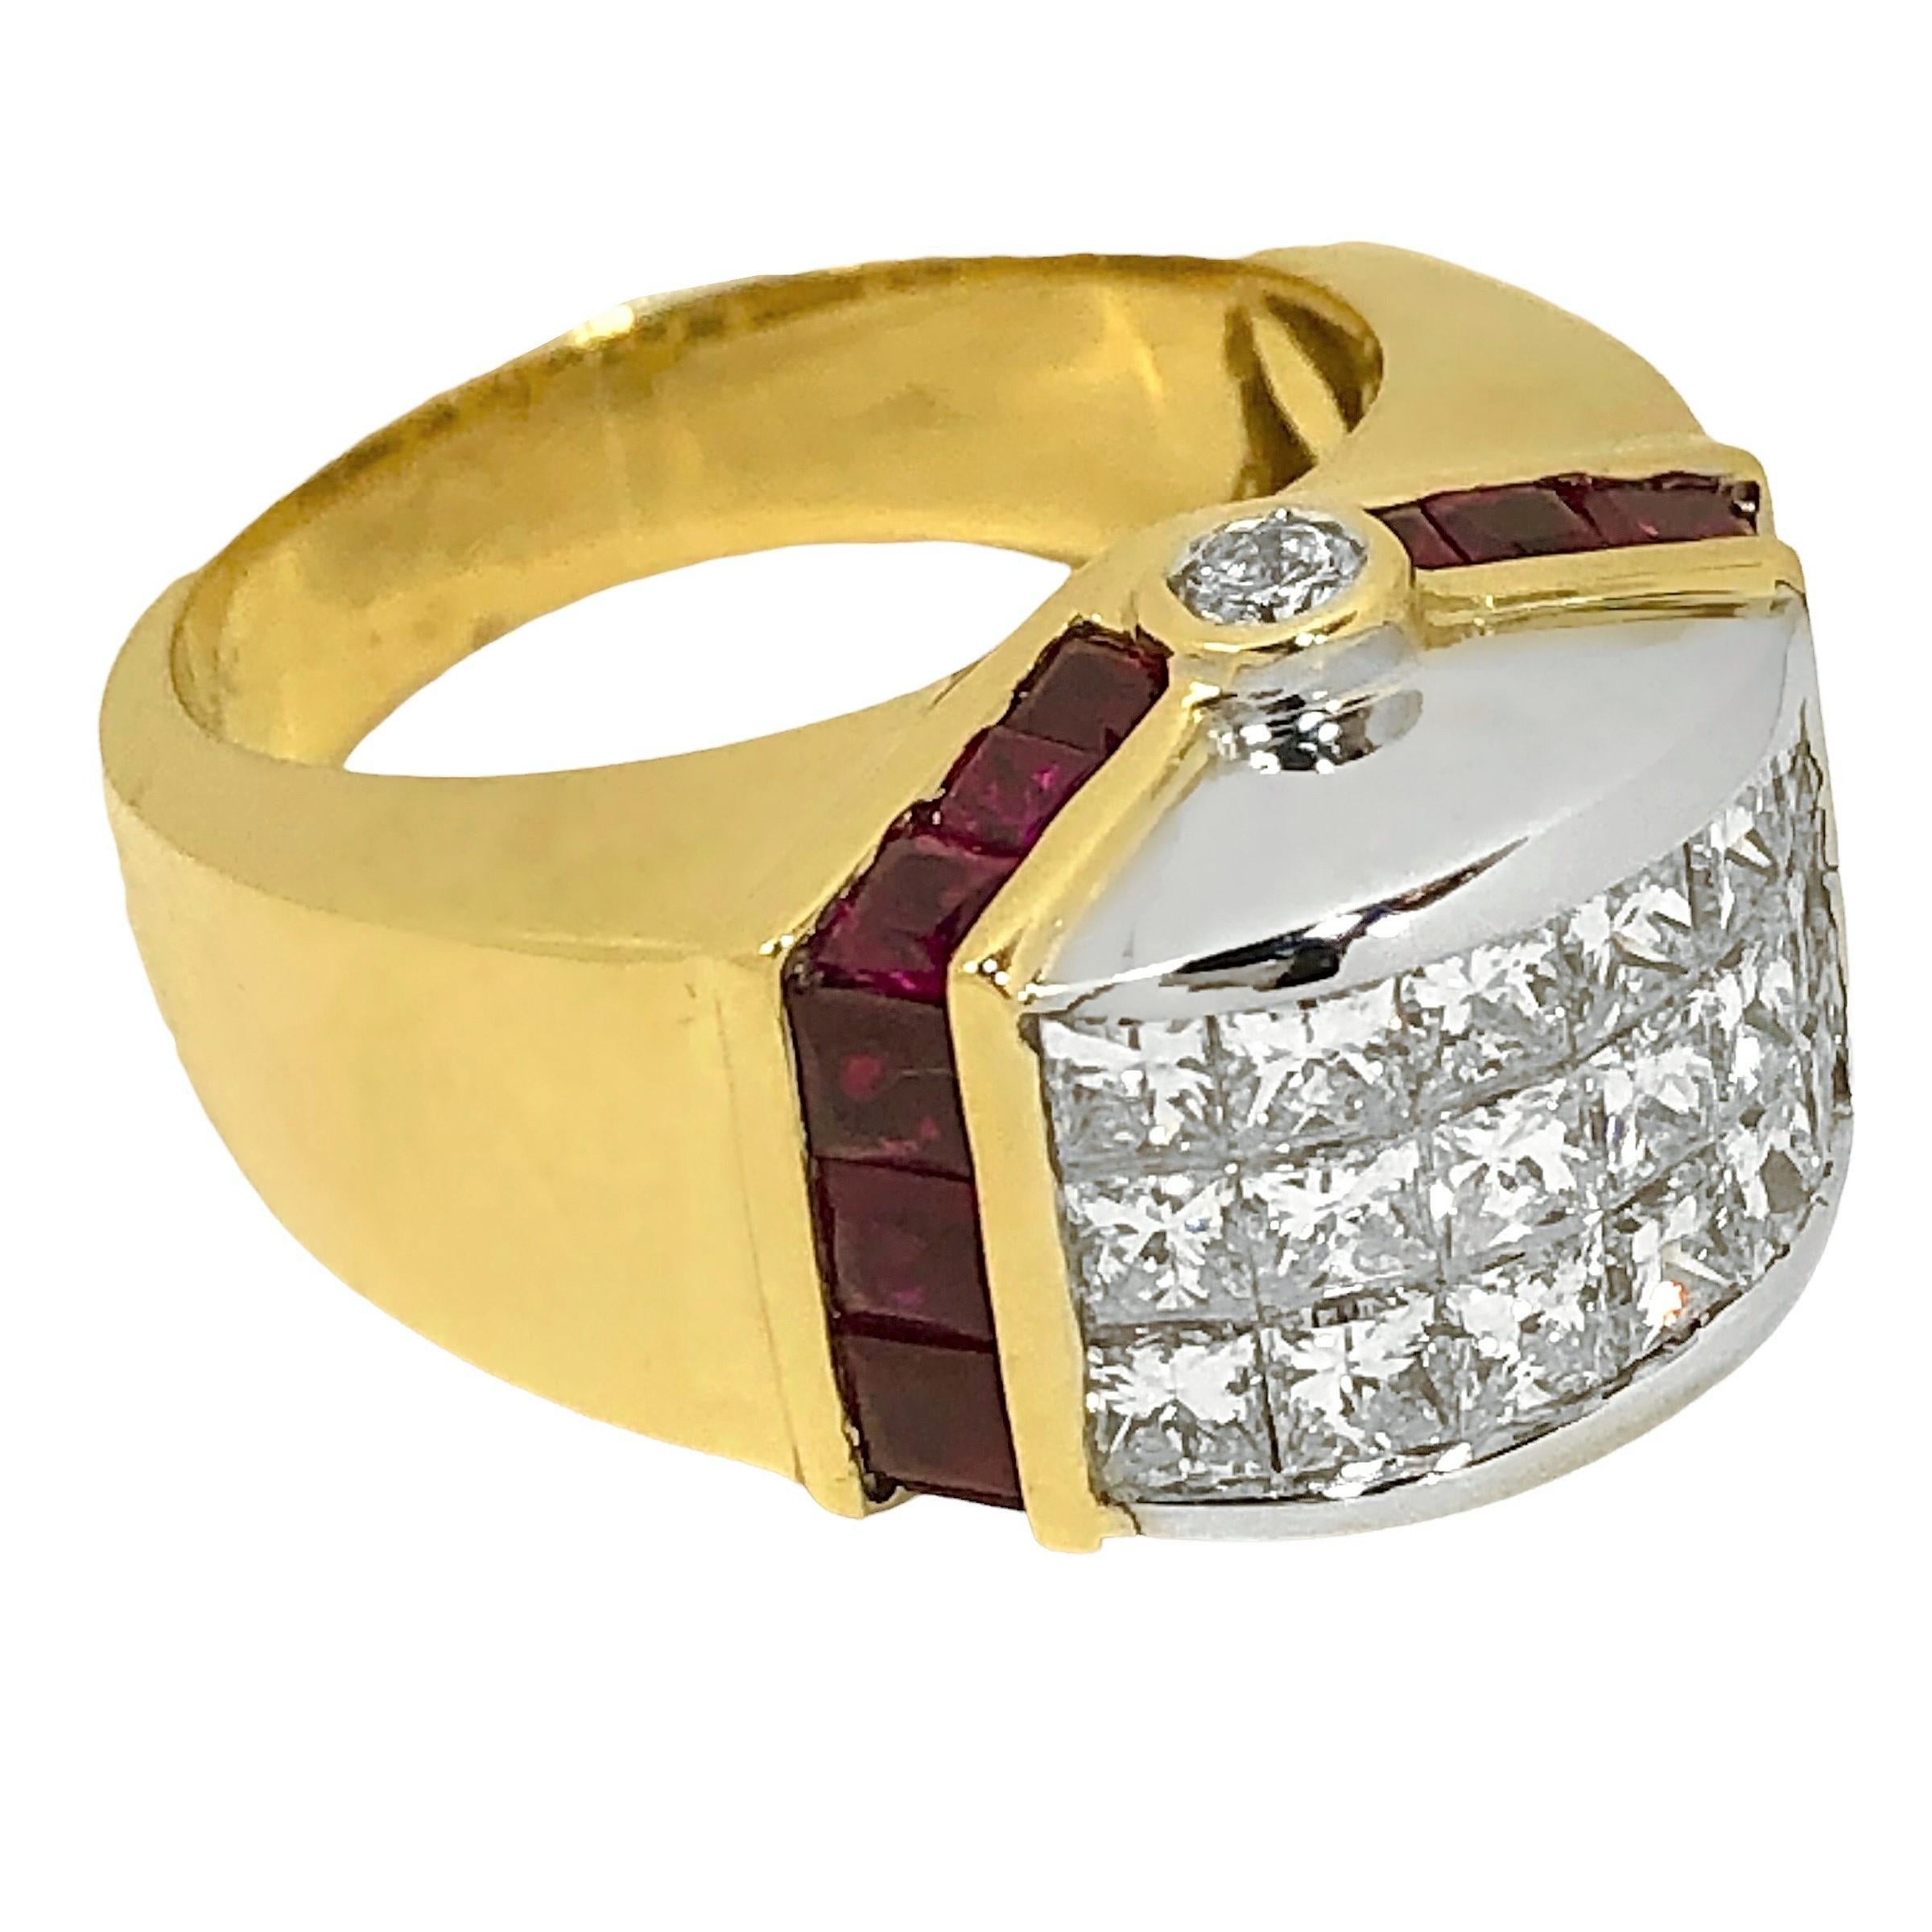 This very finely constructed 18k yellow and white gold Late-20th Century fashion ring is topped with a dome of eighteen invisible set Princess Cut diamonds. With all diamonds having a total approximate weight of 1.85ct of G color and VS1 clarity,